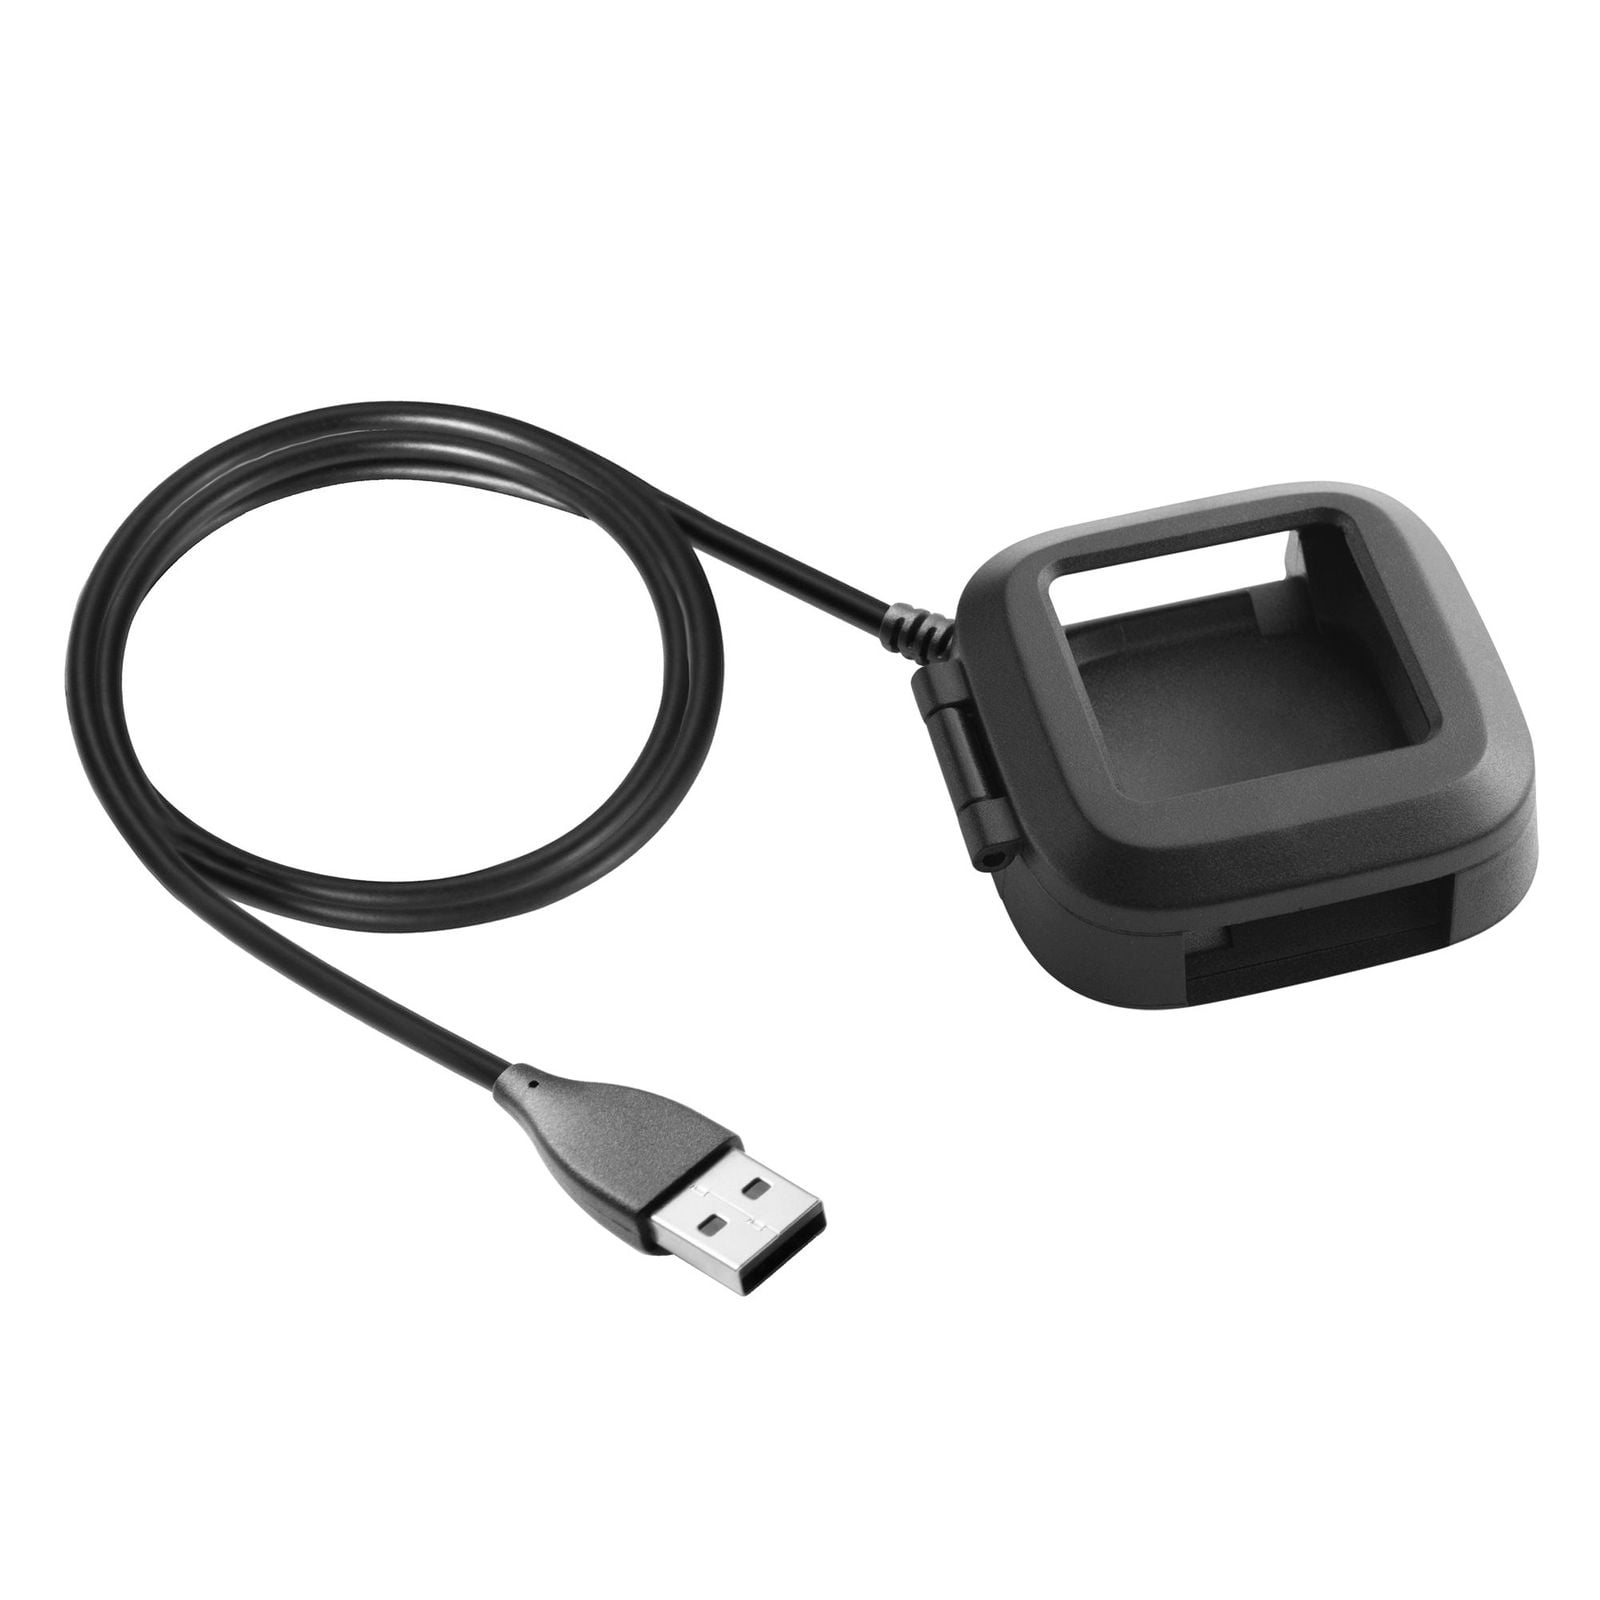 USB Charging Cable Power Charger Dock Cradle for Fitbit Versa Smart Watc TPDKTP 